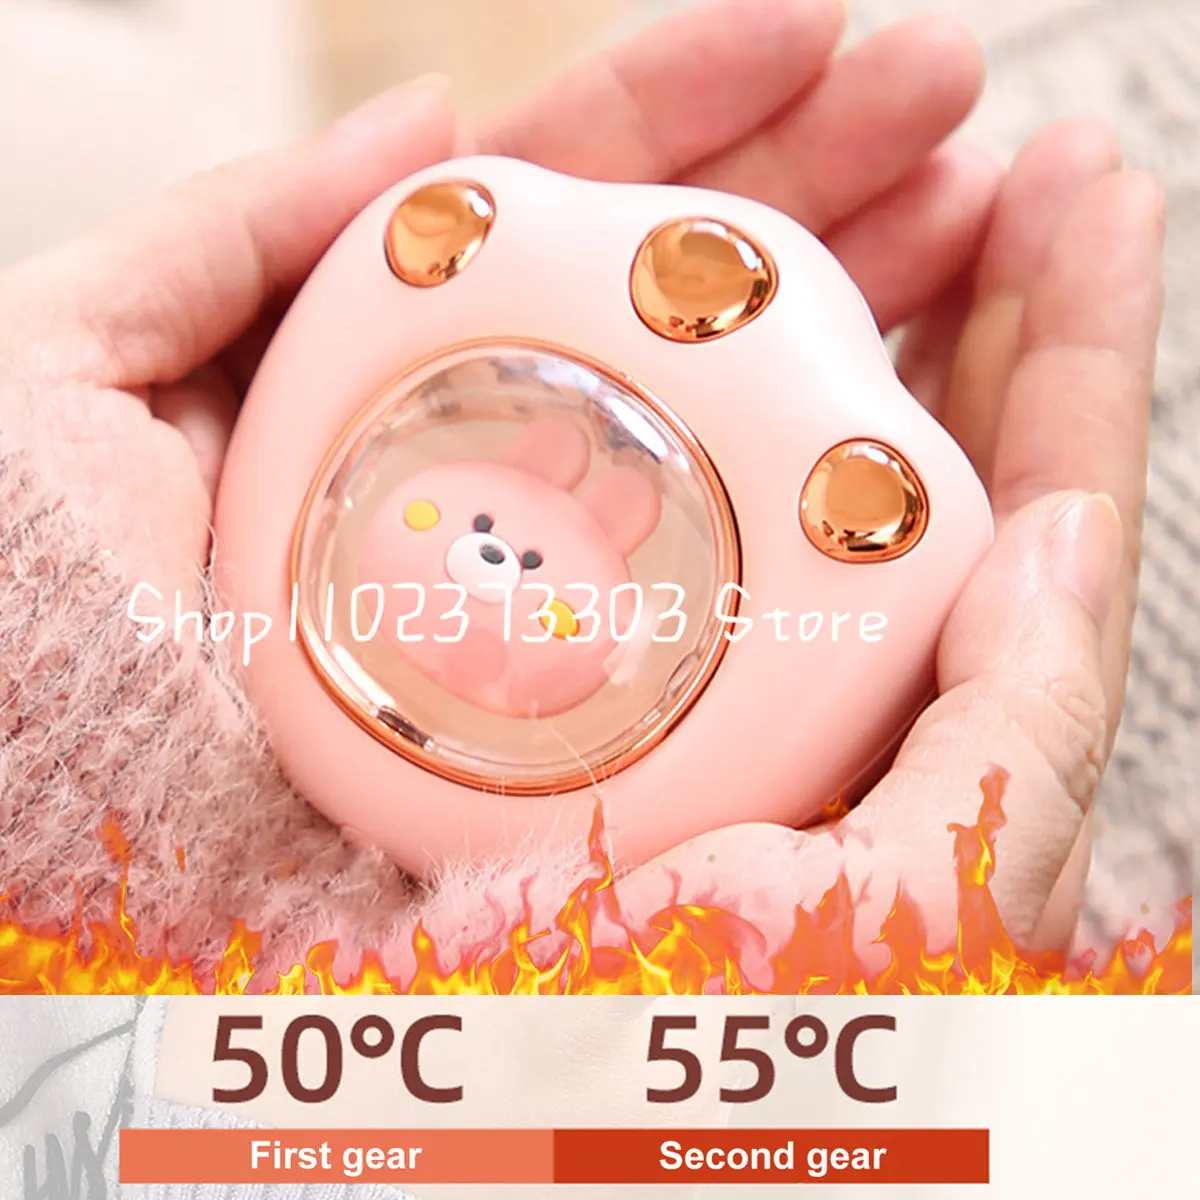 

Mini Portable Hand Warmer Cat Paw Cute Winter Heater Quick Heating 1200mAh/2400mah USB Rechargeable Pocket Electric Hands Heater